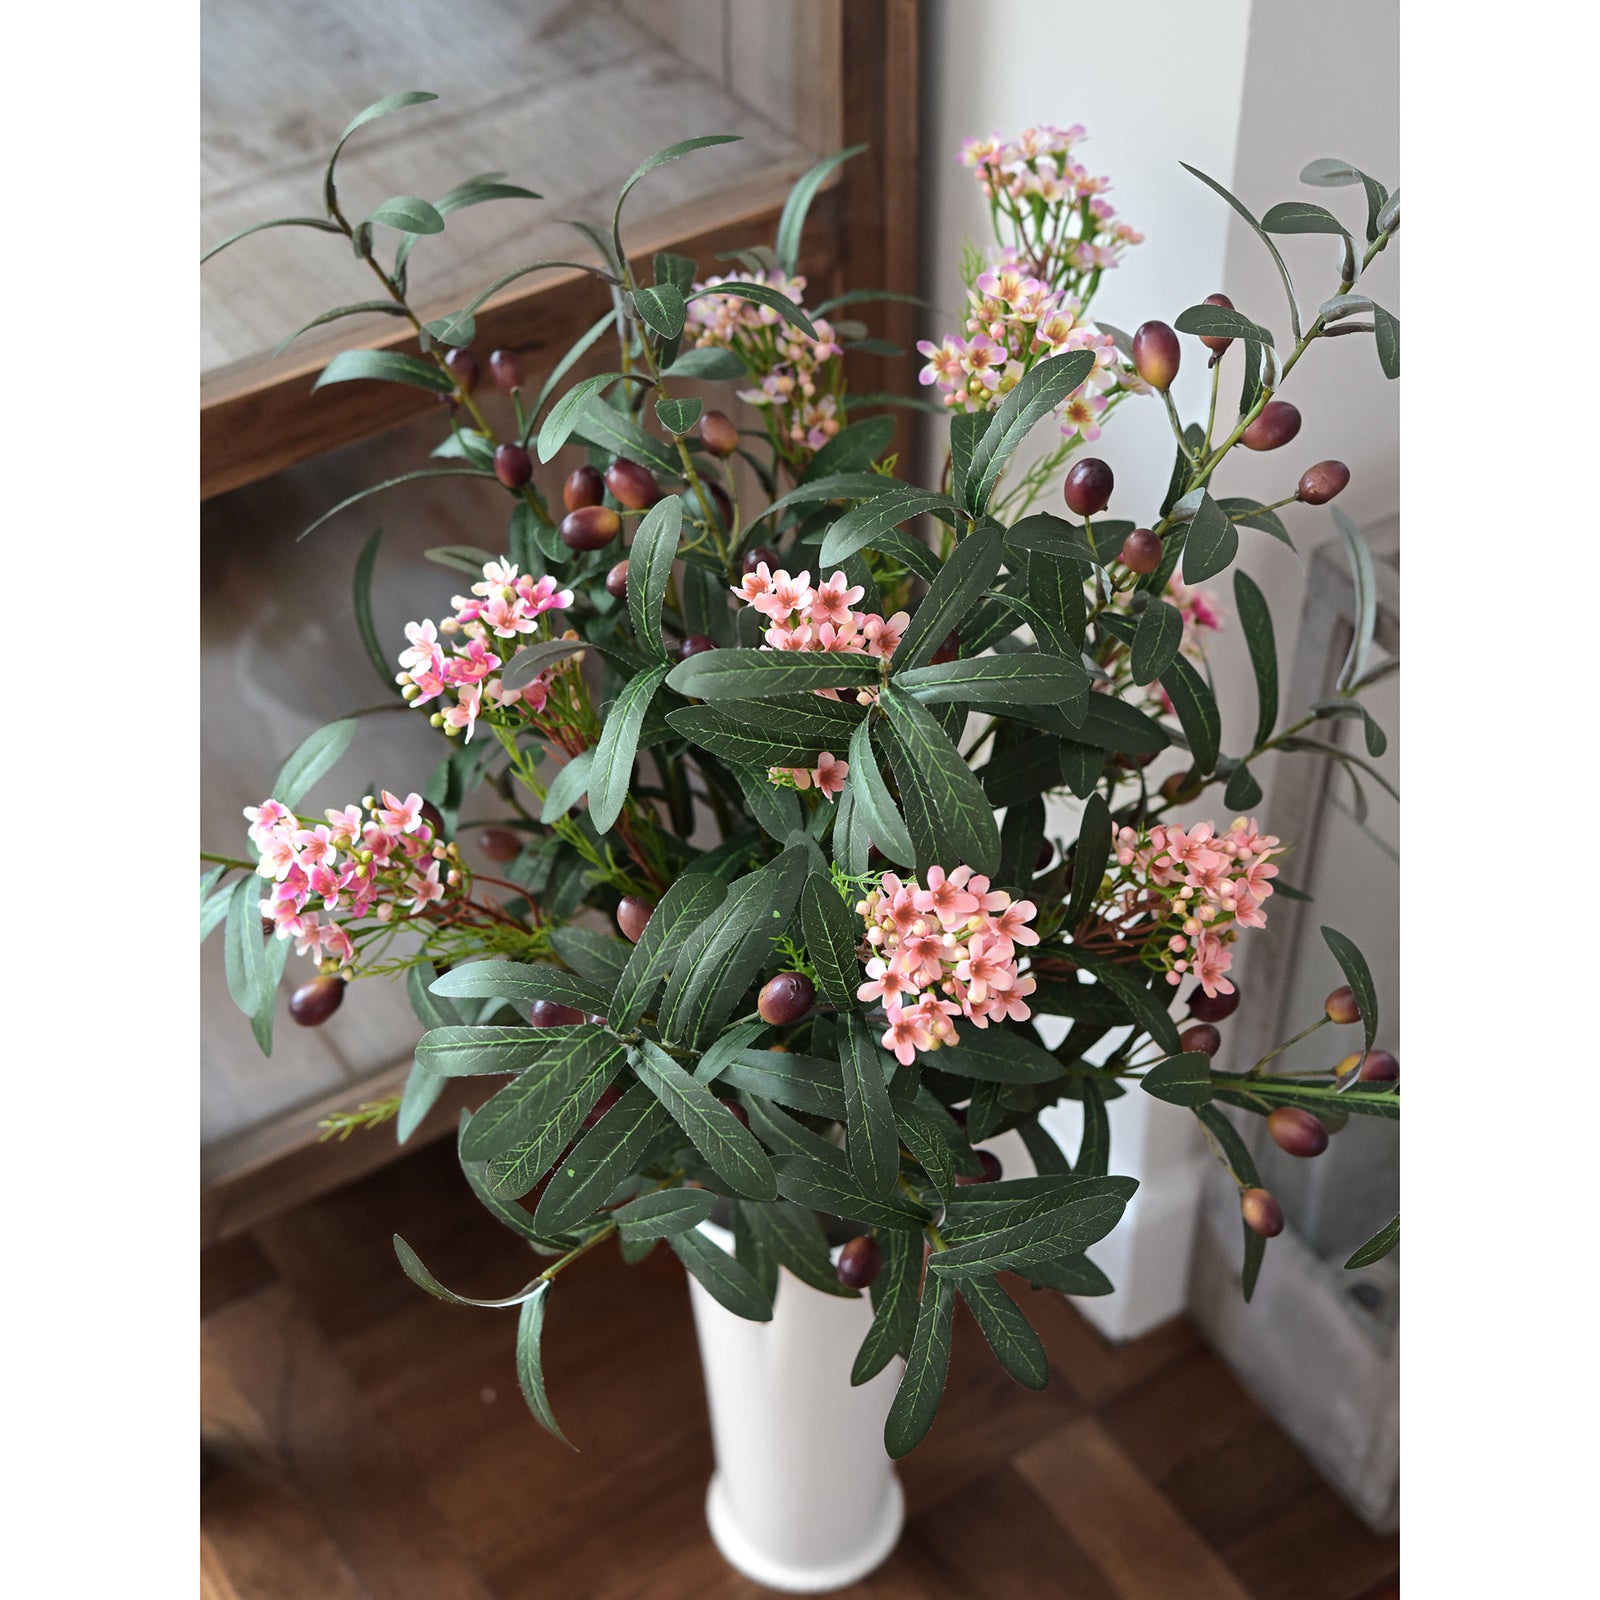 6 Stems Artificial Olive Leaves and Branches with Olives Greenery Floral Arrangement 31 inches (78cm)